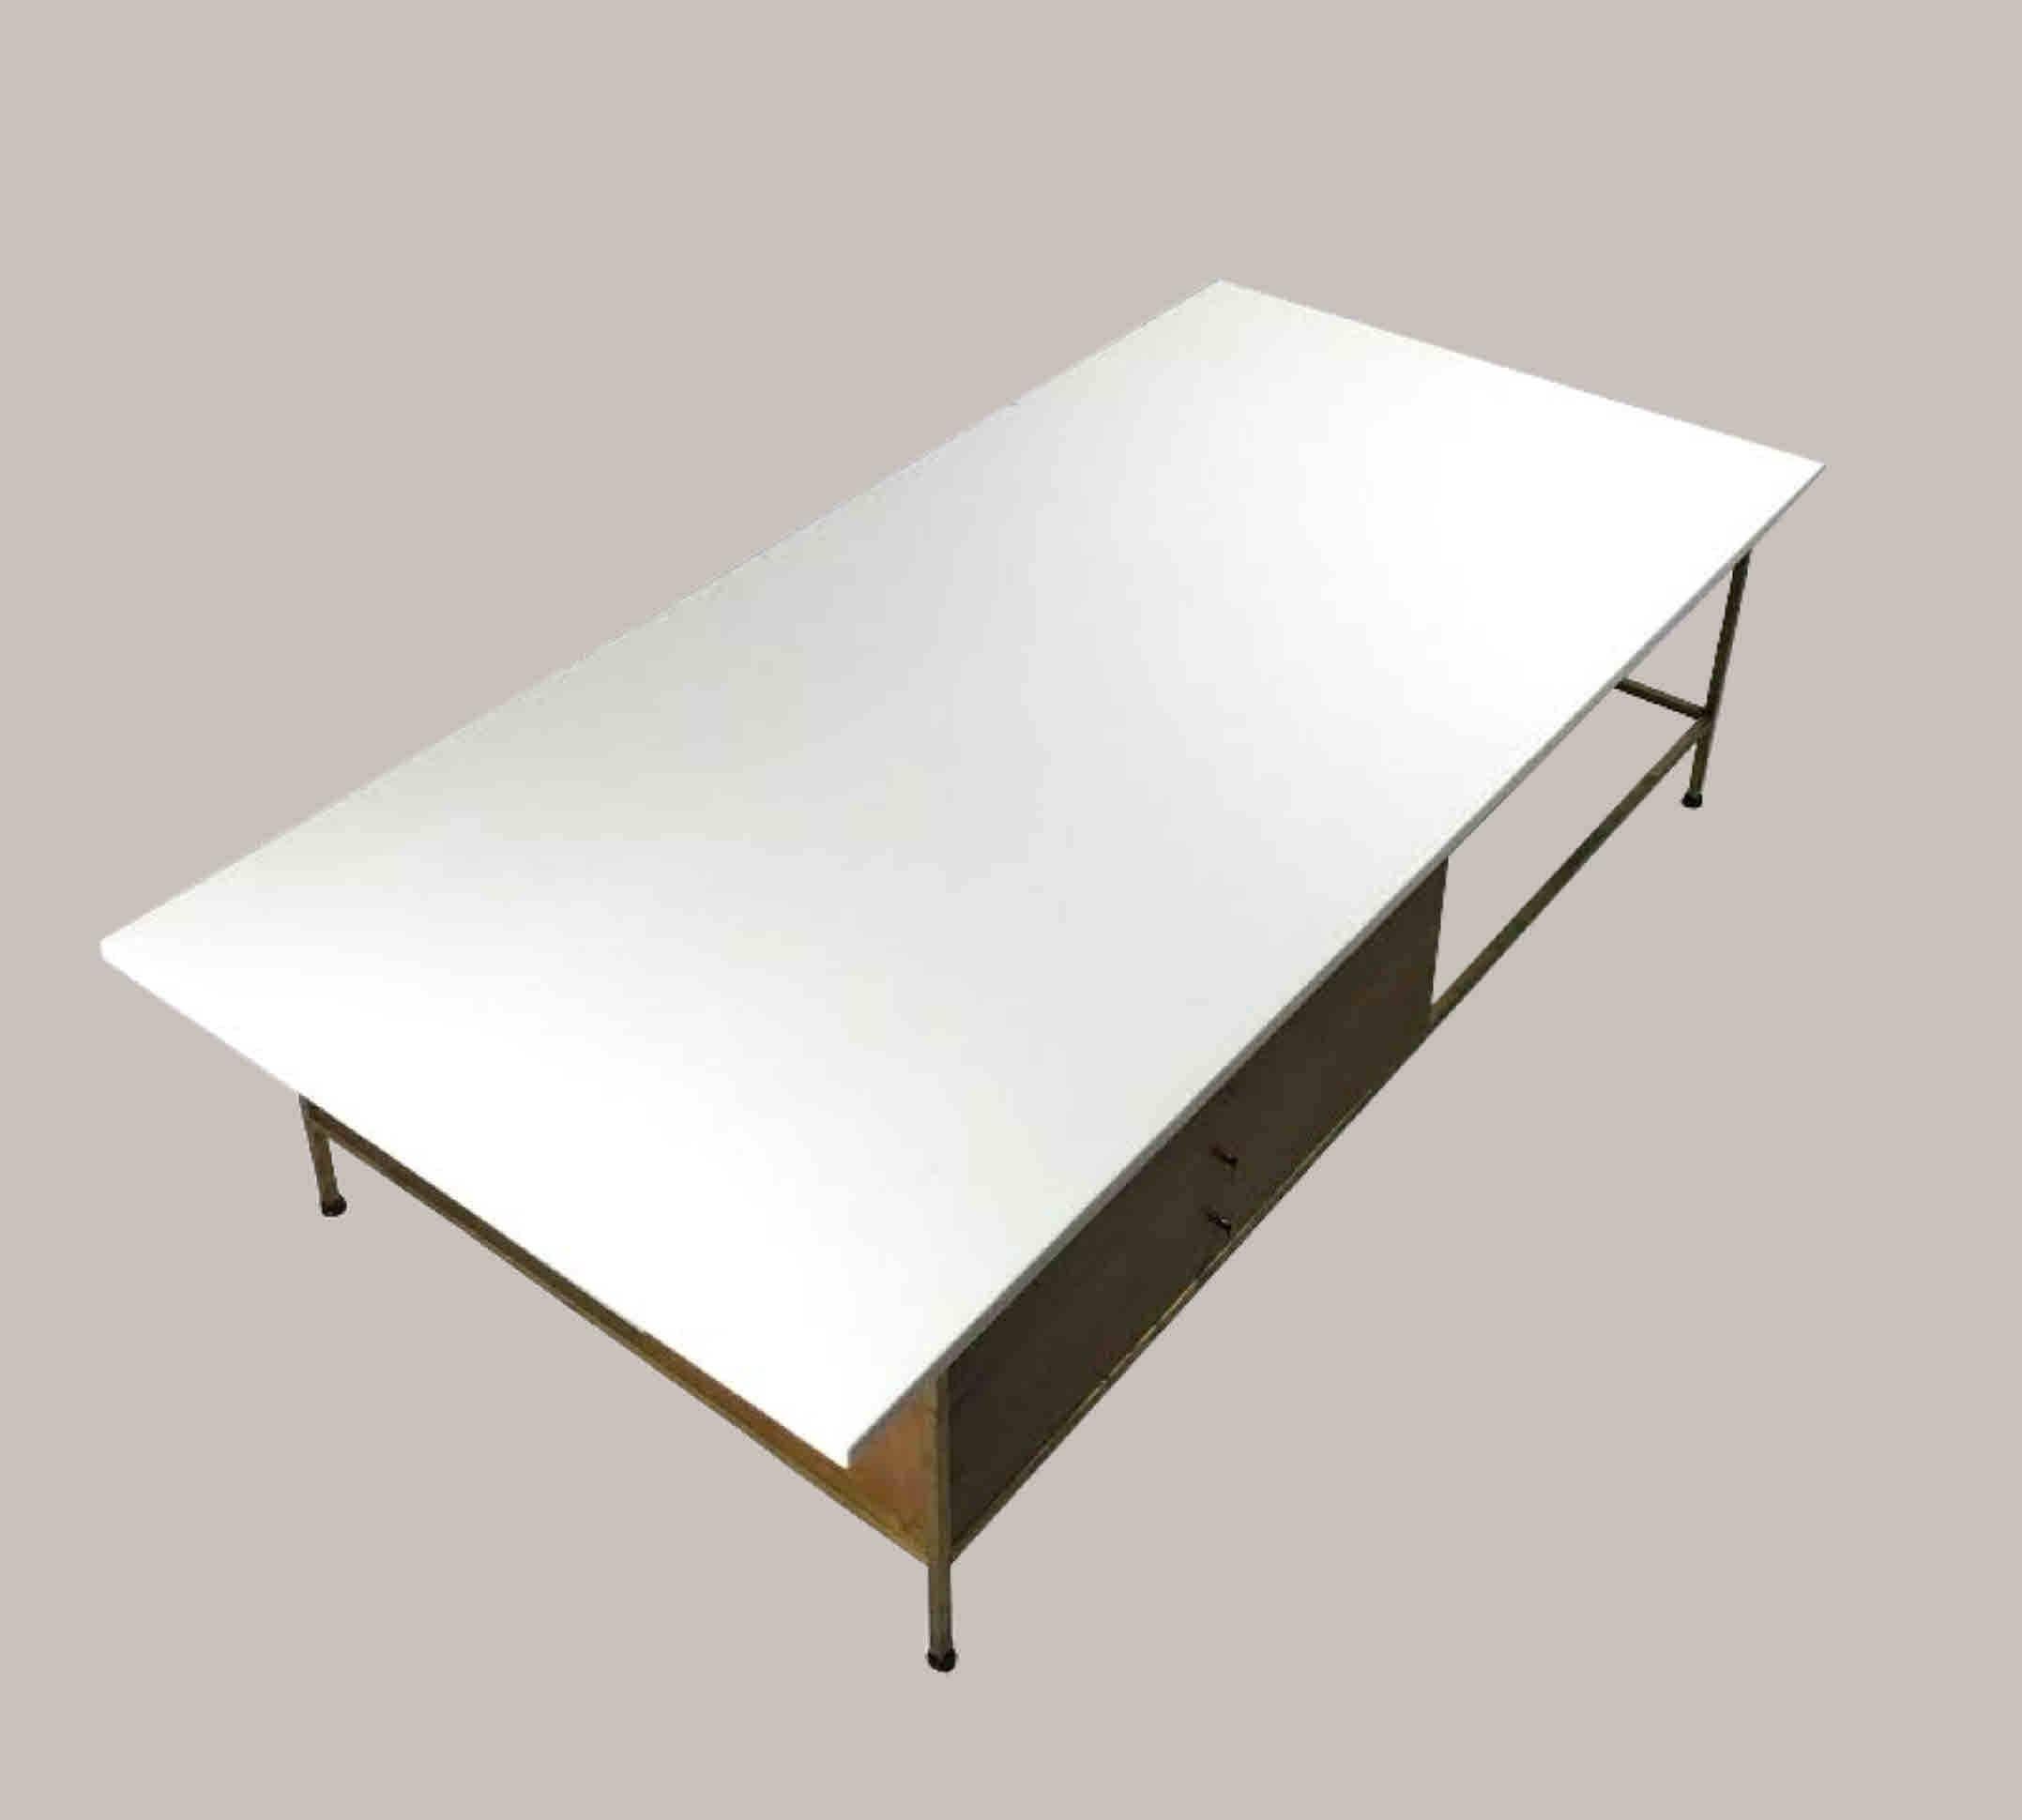 Brass framed coffee table with the original Vitrolite top and three drawers, by Paul McCobb for Calvin furniture. In excellent condition, despite a single chip in the Vitrolite. The dimensions are 66